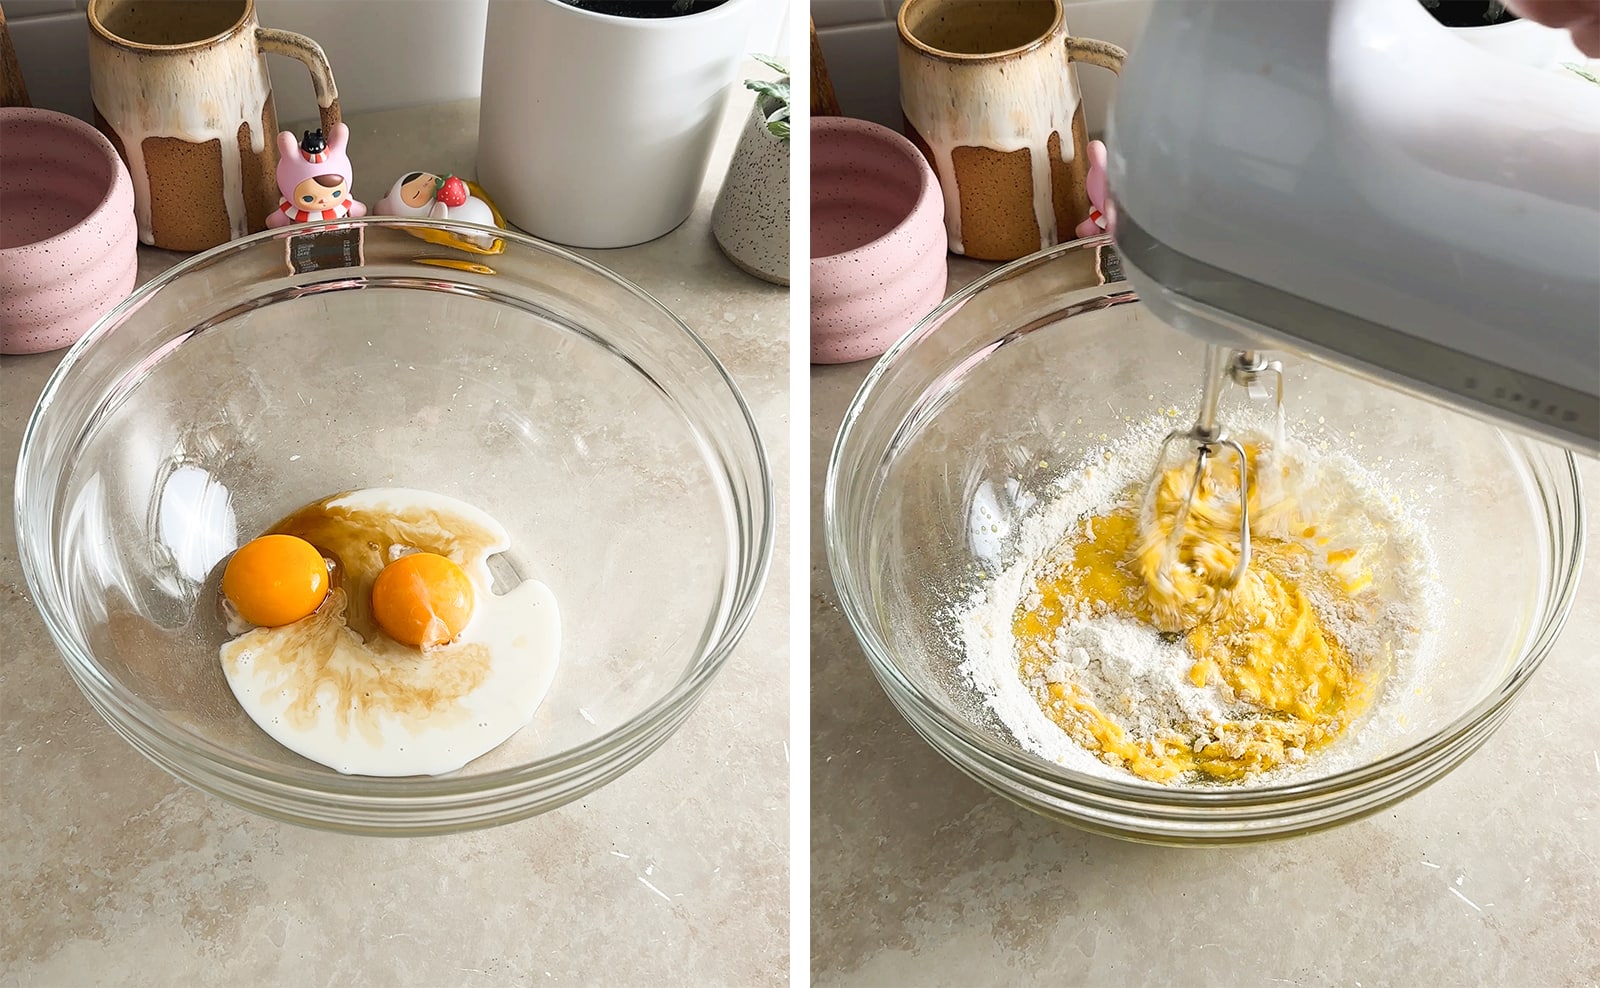 Left to right: egg yolks and wet ingredients in a mixing bowl, mixing ingredients with a hand mixer.